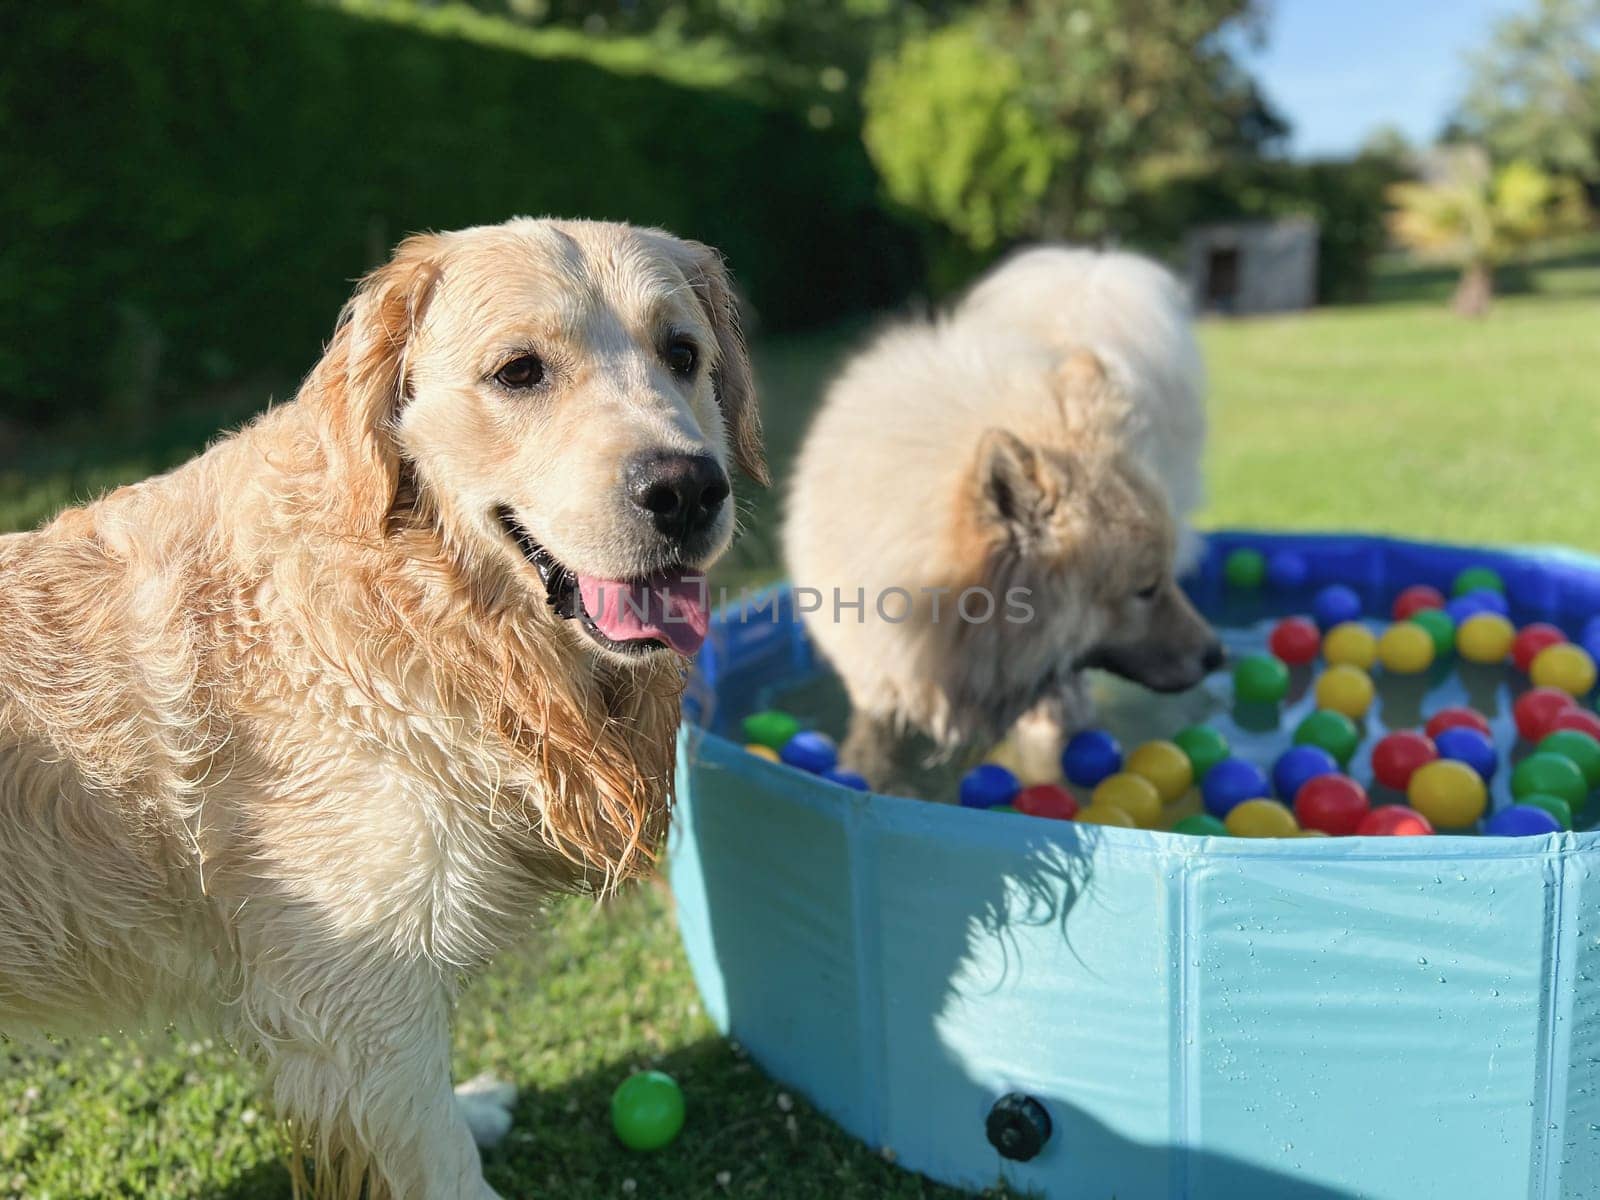 The labrador et eurasier playing in a pool with balls in a garden